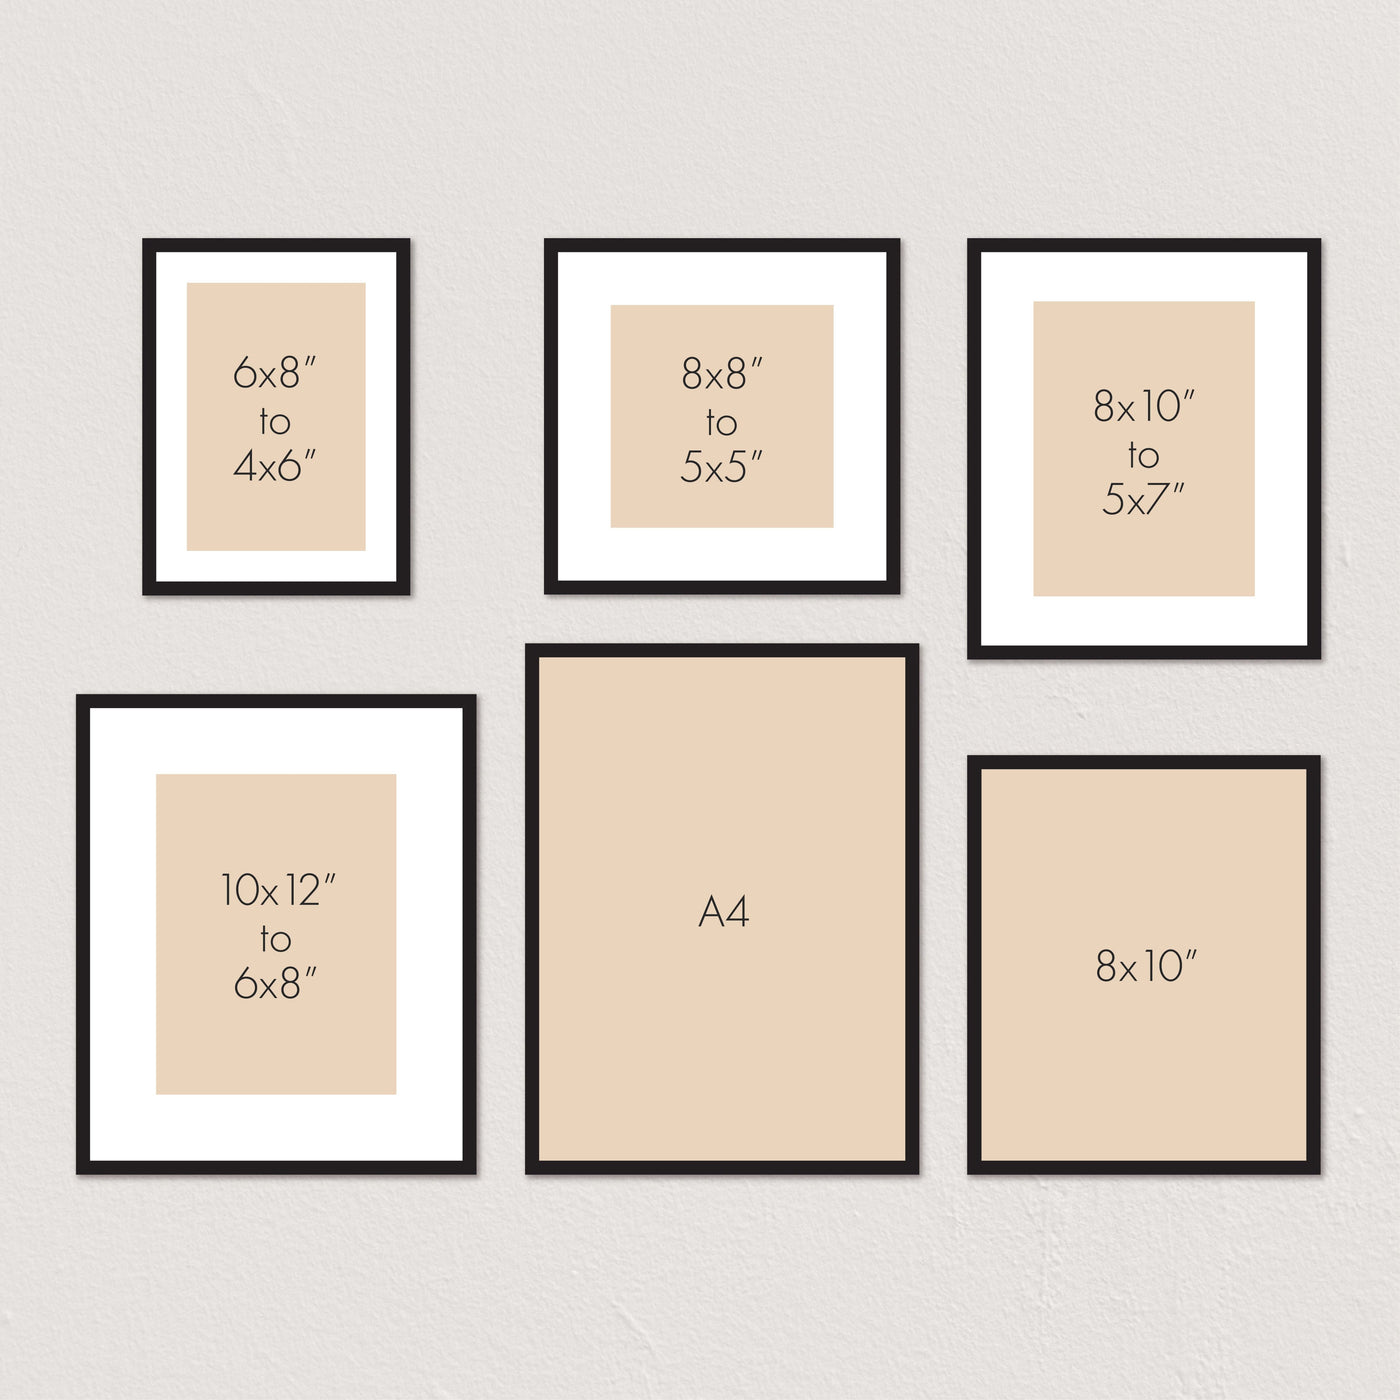 Deluxe Gallery Photo Wall Frame Set B - 6 Frames from our Australian Made Gallery Photo Wall Frame Sets collection by Profile Products Australia